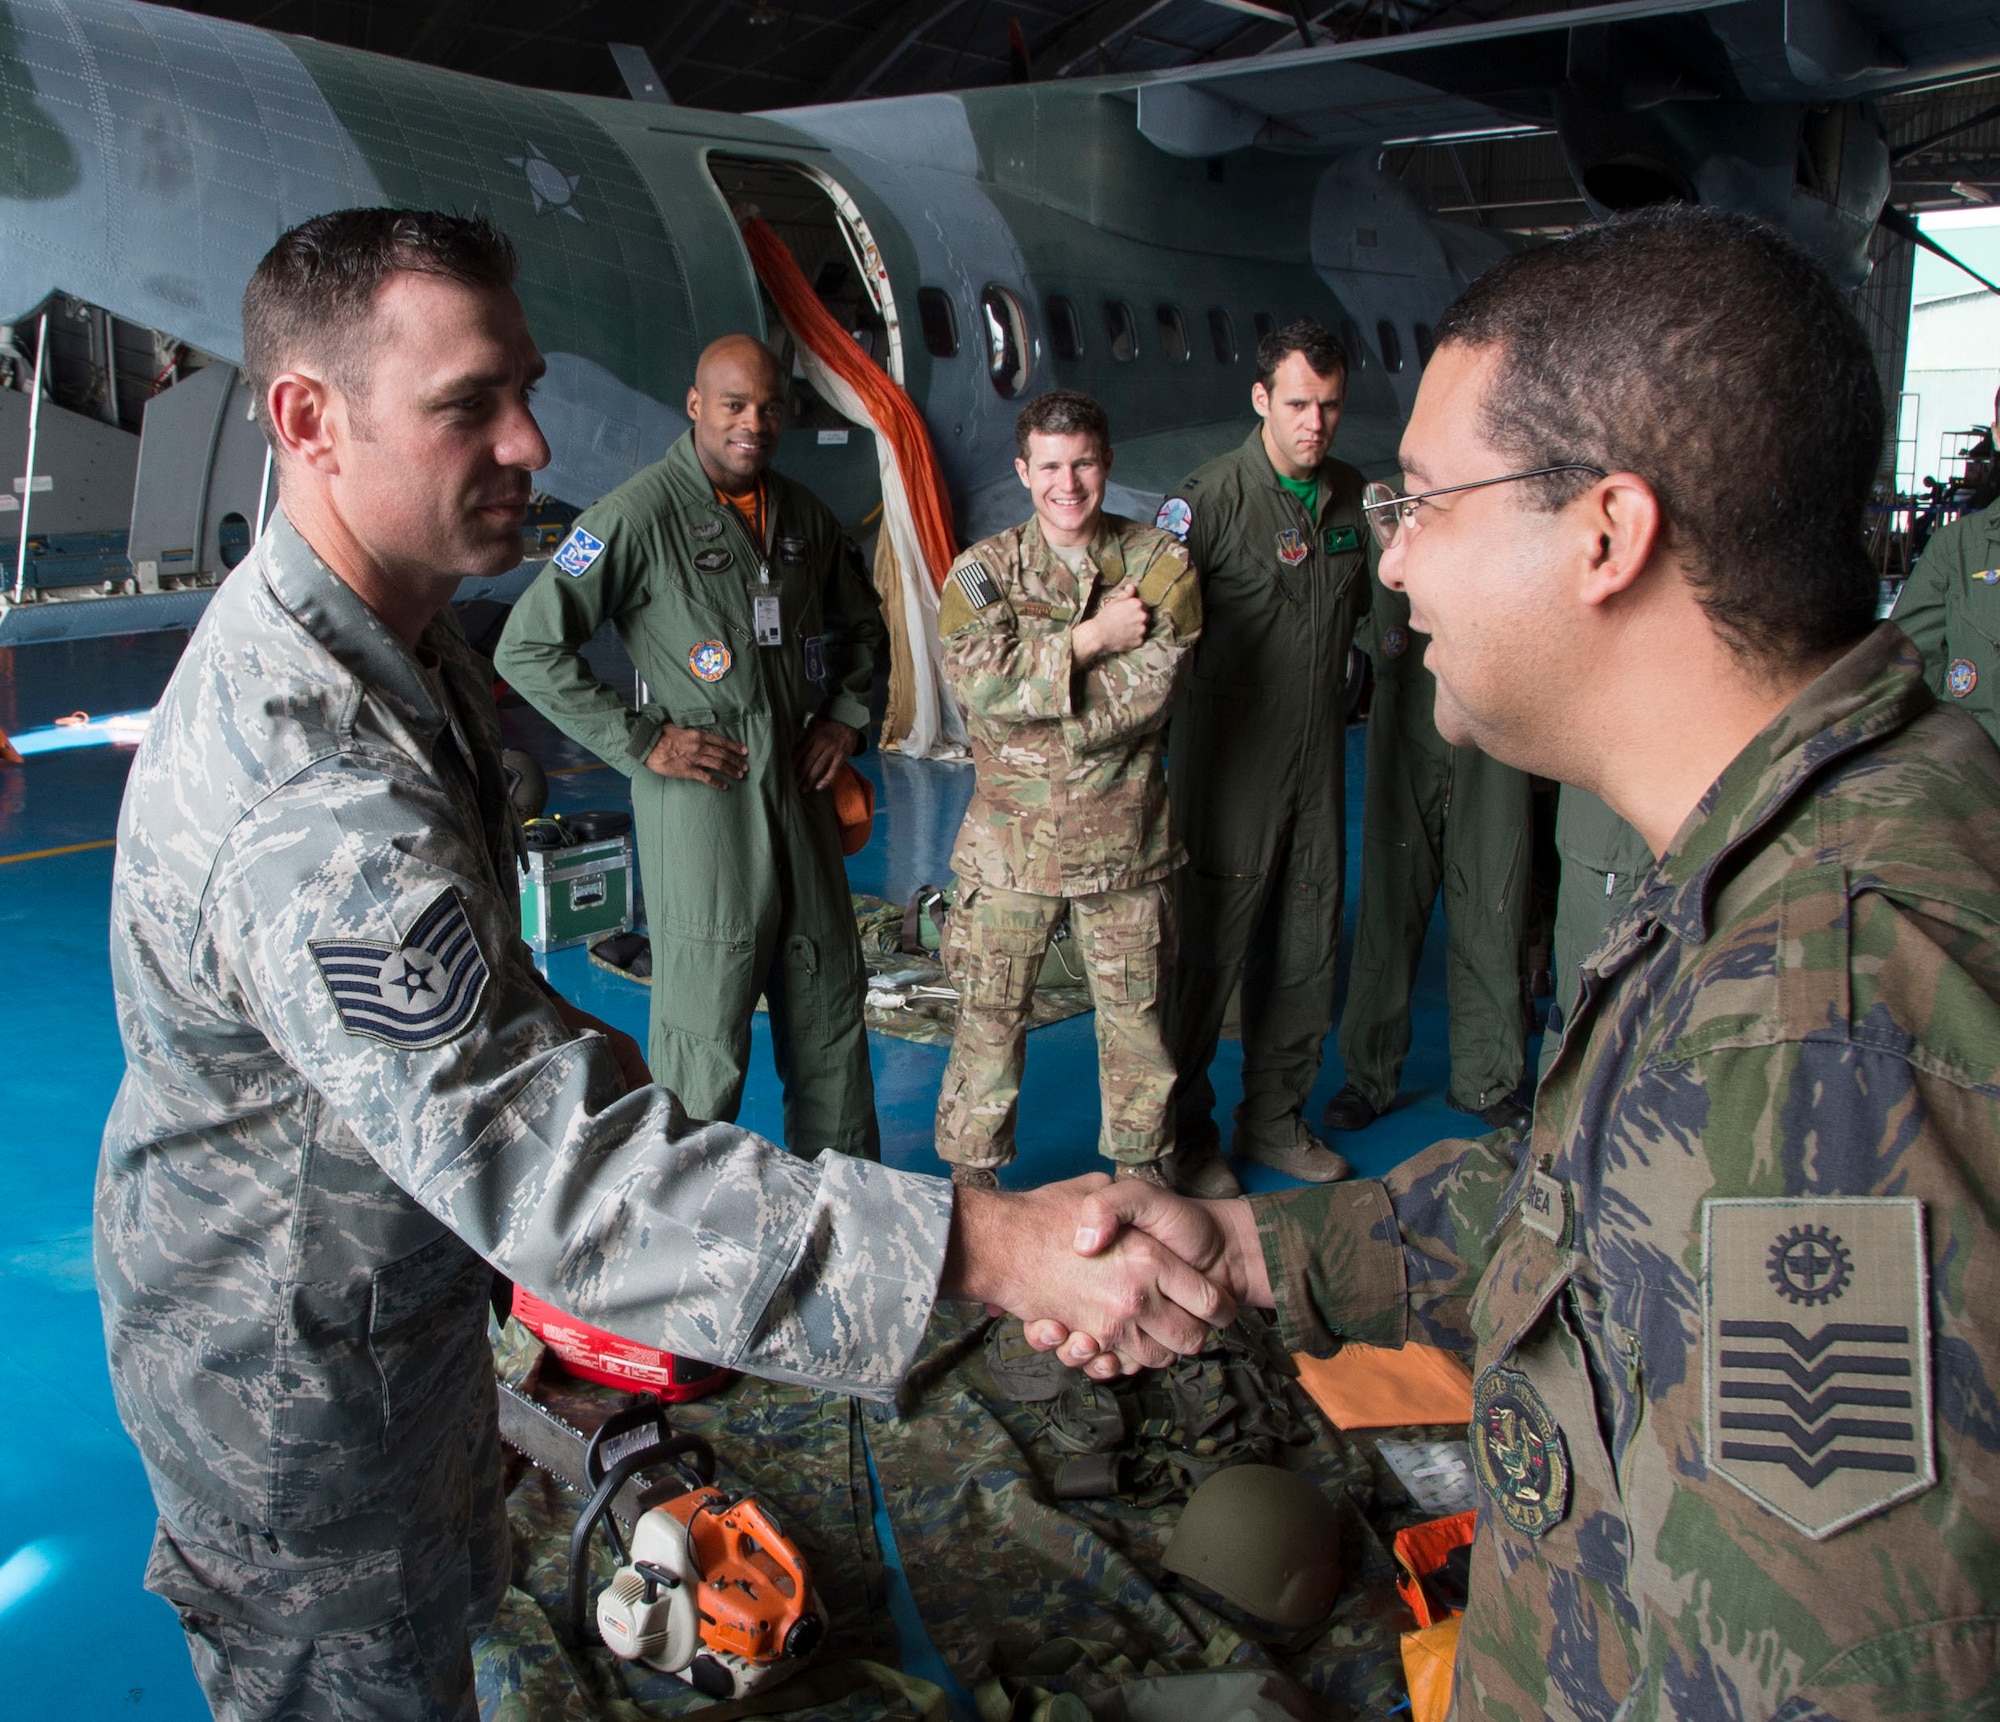 Tech Sgt. Daniel Foret, 571st Mobility Support Advisory Squadron survival, evasion, resistance and escape specialists, shakes hands with a member of the Brazilian air force’s air crew flight equipment section after a demonstration on their capabilities, May 15, 2015 in Campo Grande, Brazil. Members of AFE are responsible for ensuring the equipment assigned to air crews is properly maintained. (U.S. Air Force photo by Staff Sgt. Adam Grant/Released)